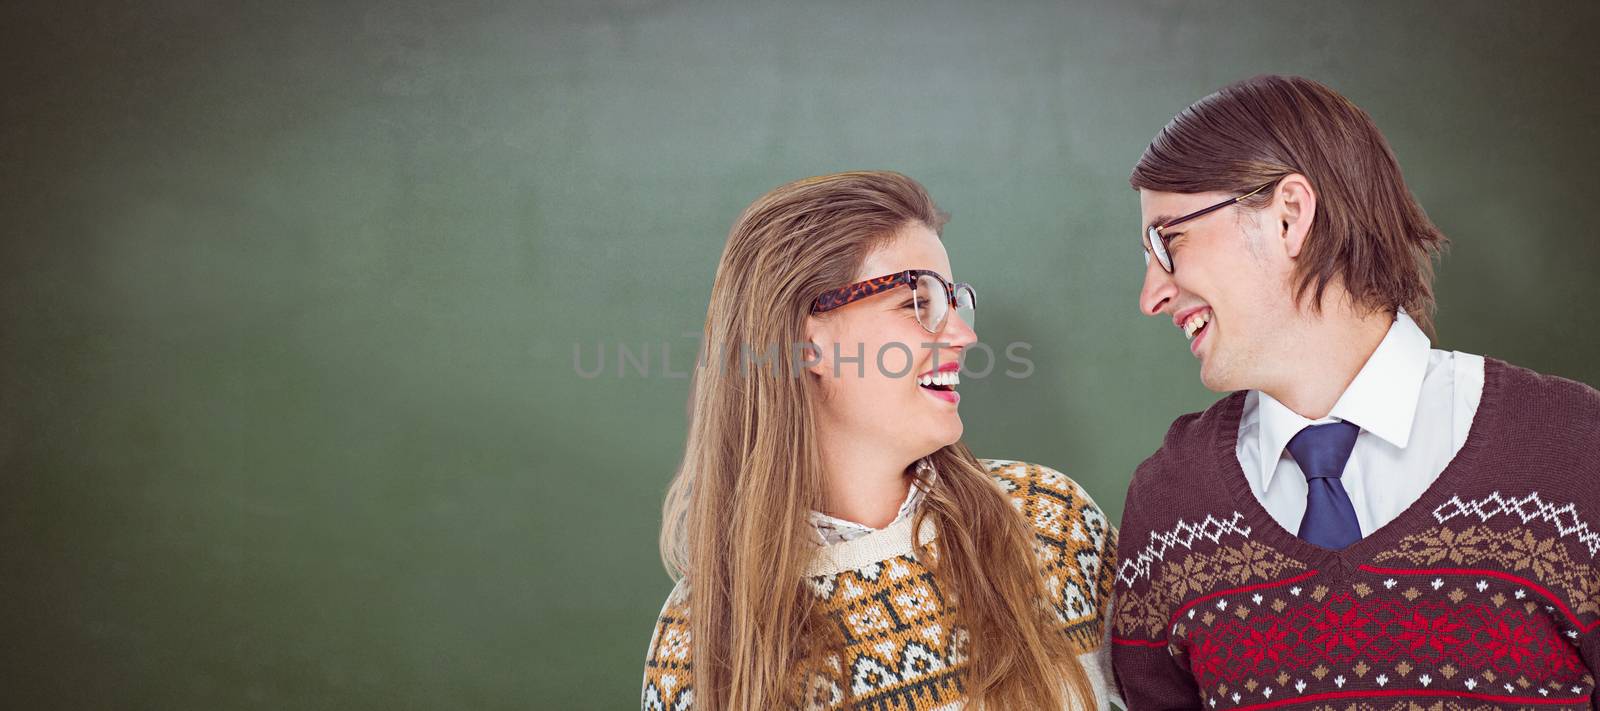 Happy geeky hipster couple looking at each other against green chalkboard